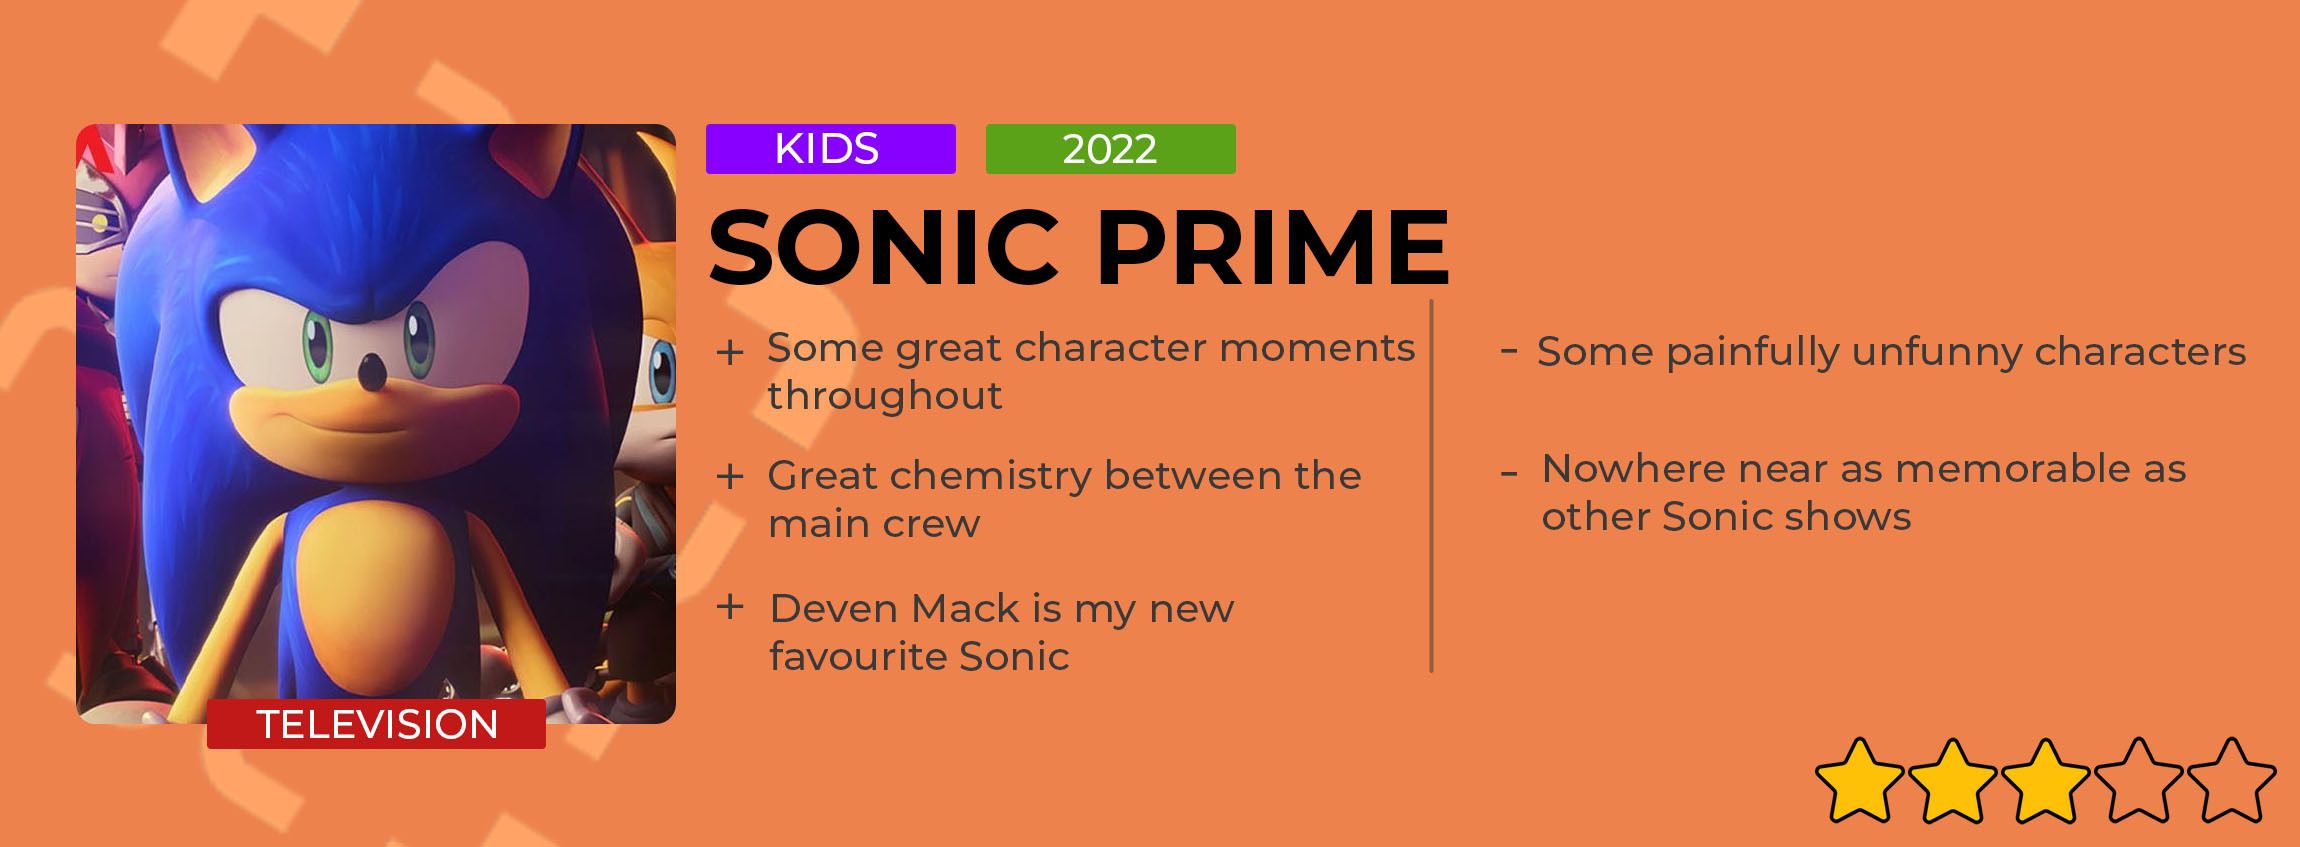 Sonic Prime review card